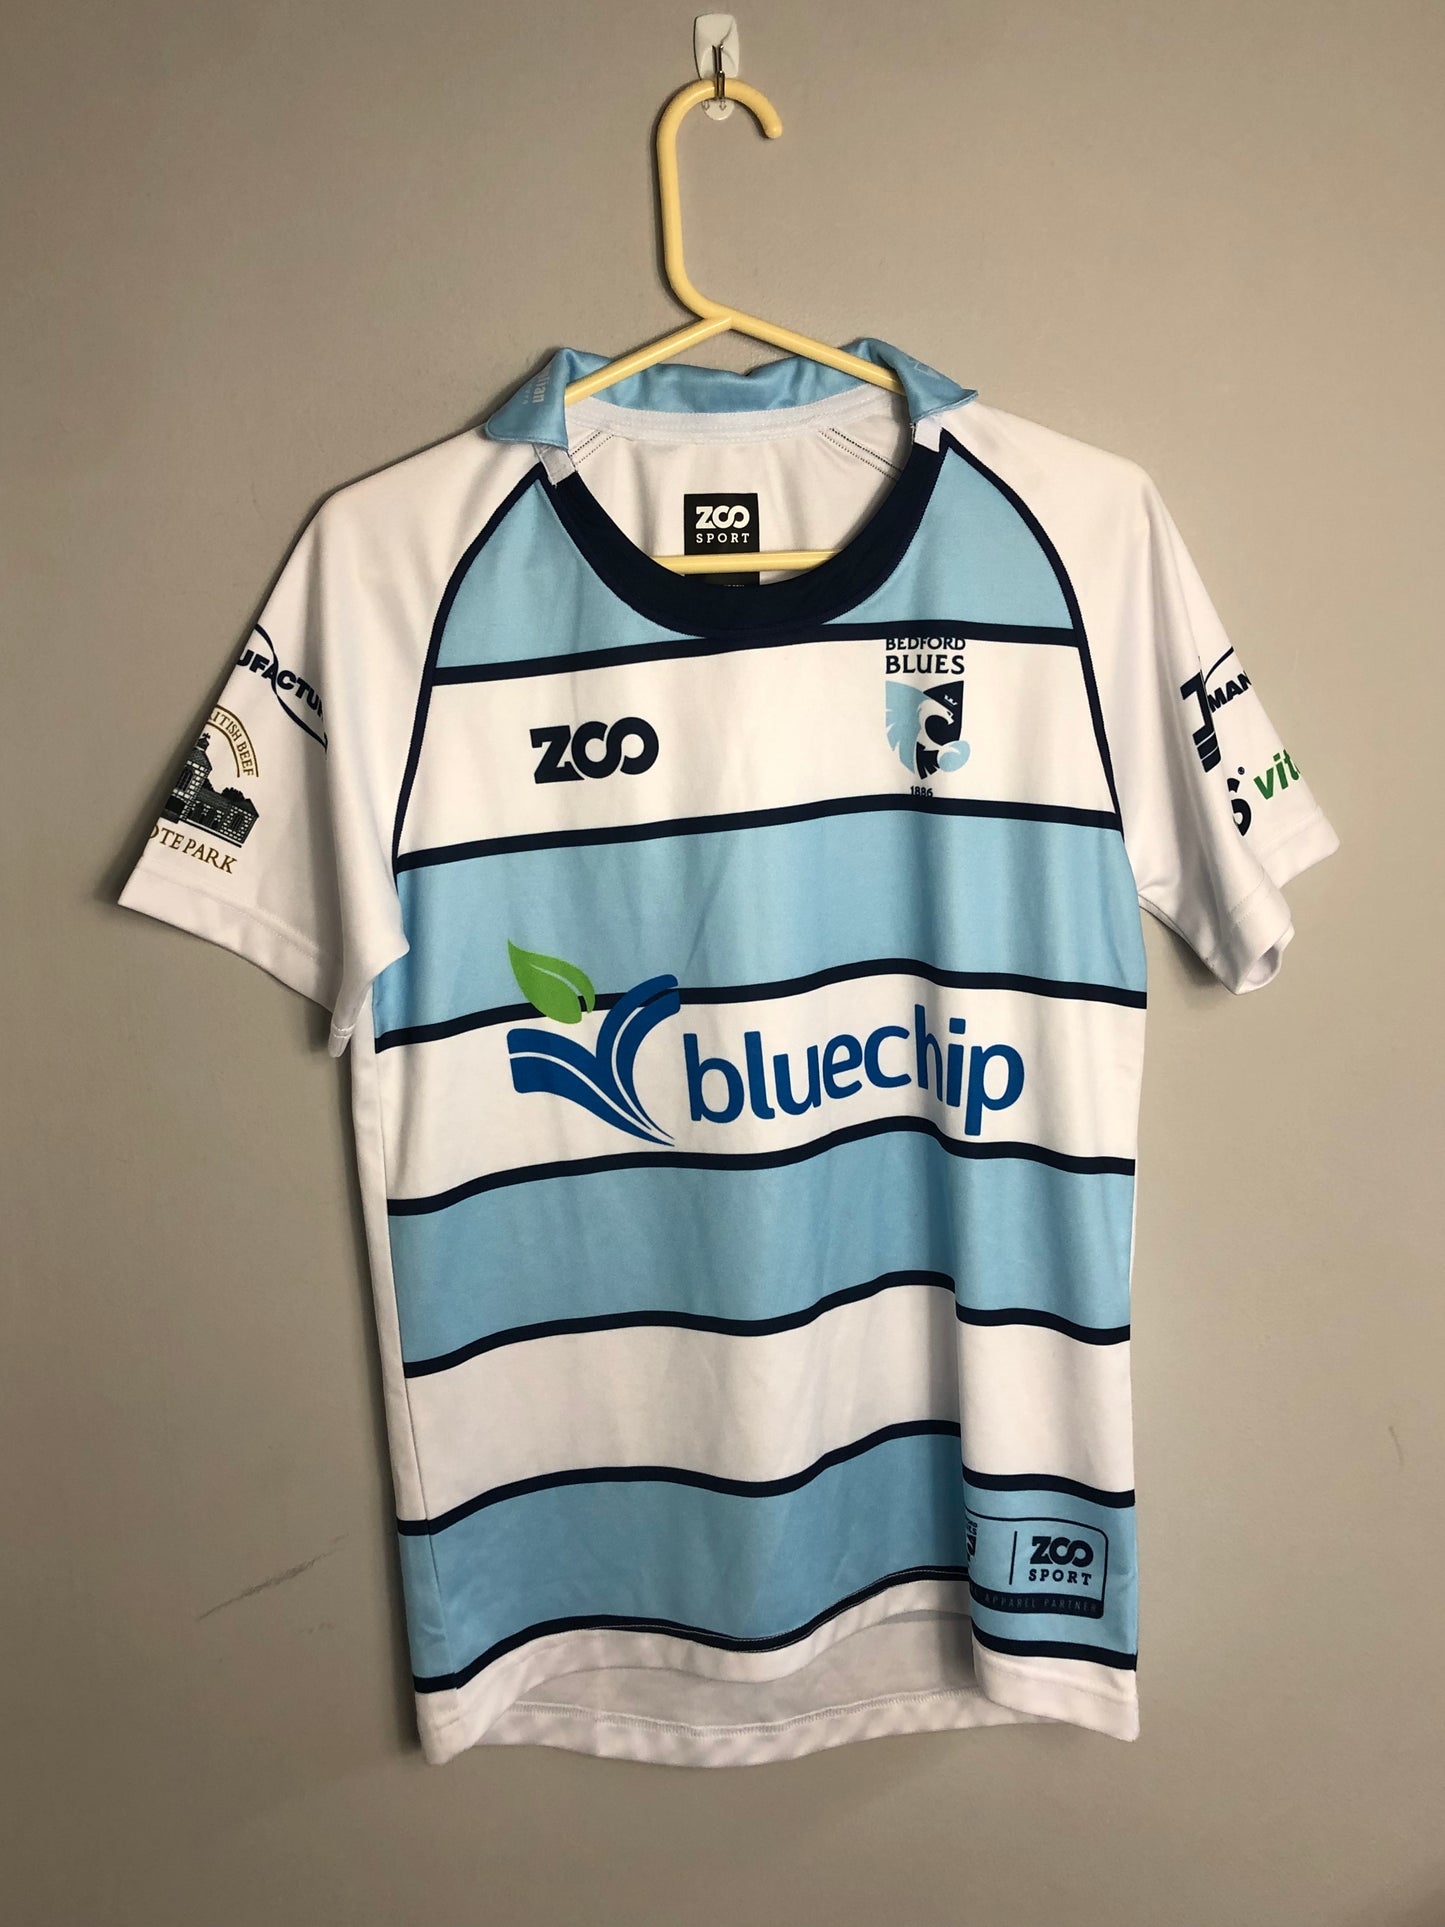 Bedford Blues Away Shirt - 14 years - 36” Chest